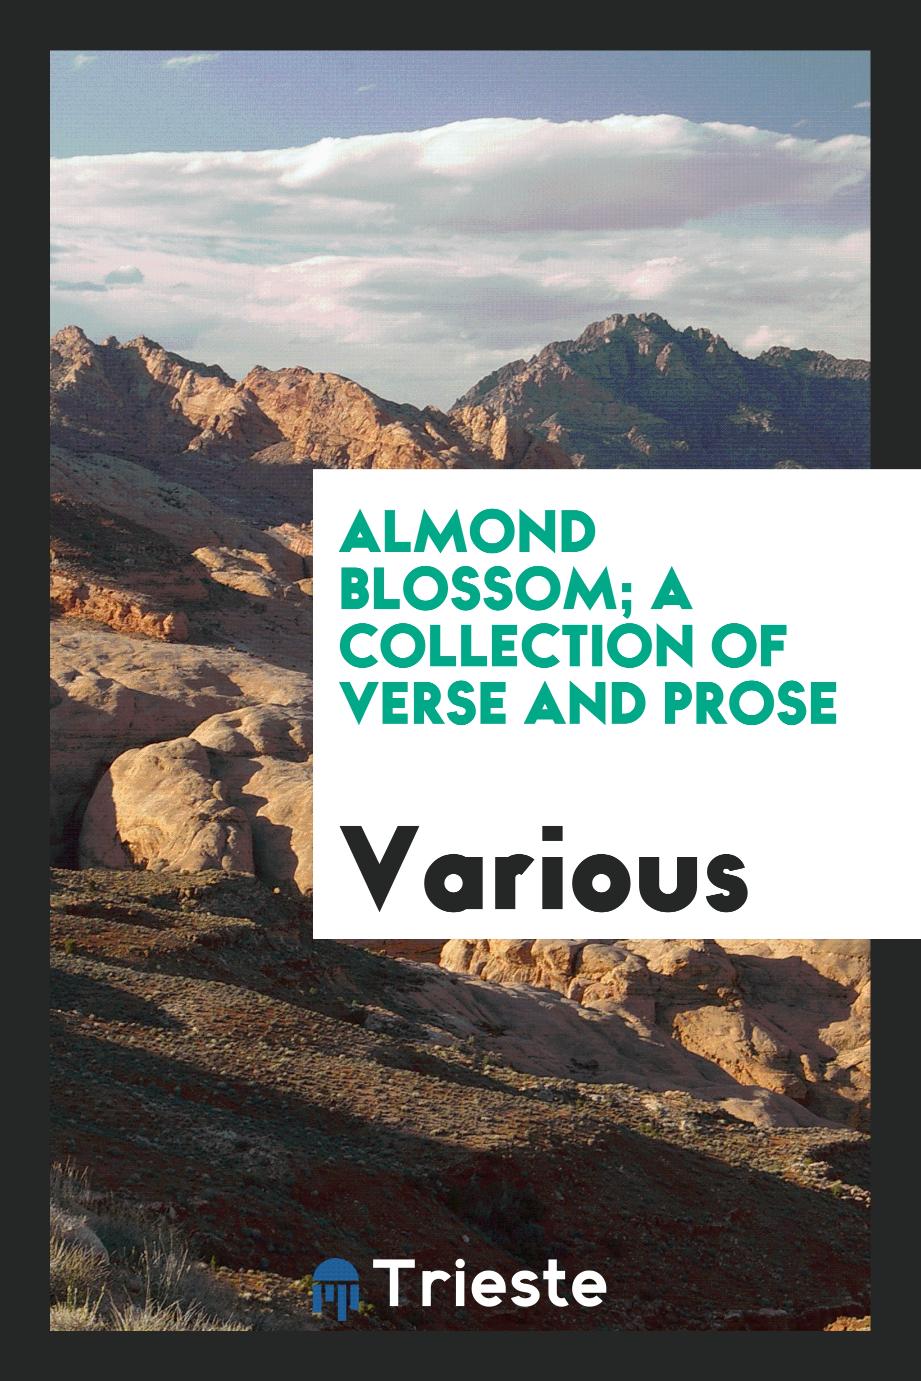 Almond blossom; a collection of verse and prose